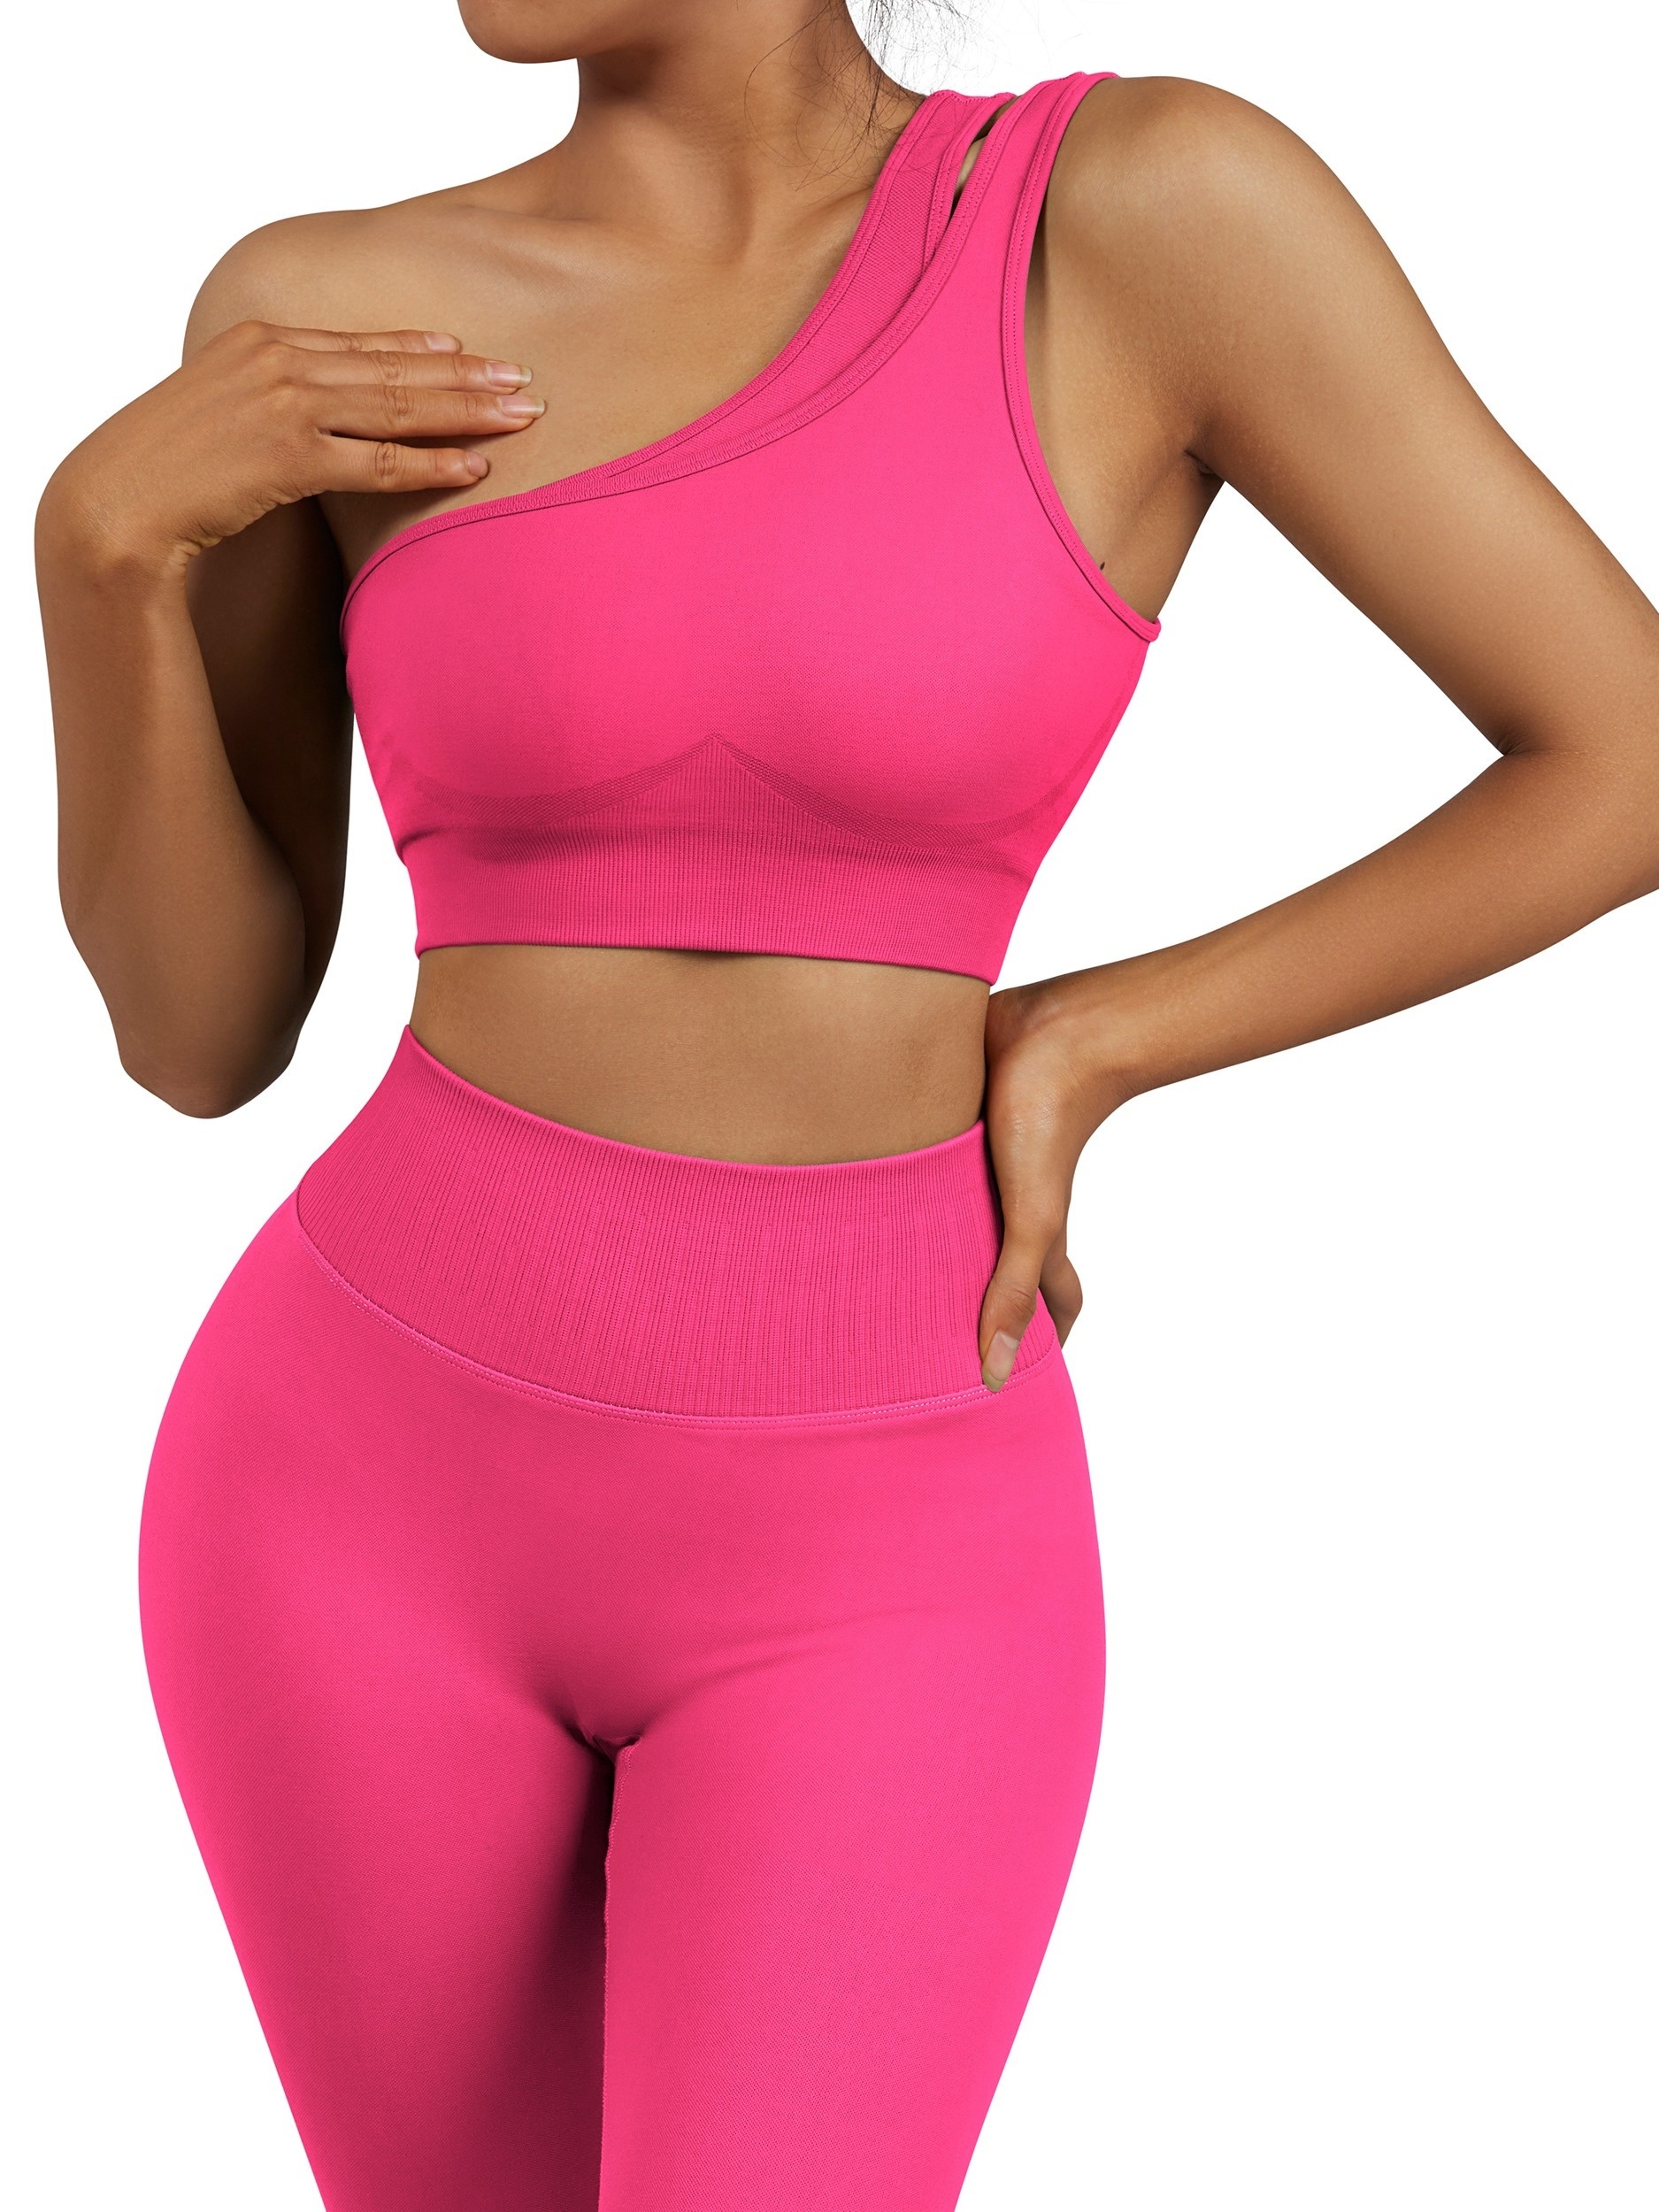 Womens Seamless Pink Yoga Set Short Sleeve Leggings And Top For Fitness,  Gym, And Workouts Solid And Breathable Sportswear From Chinafashion3,  $25.41